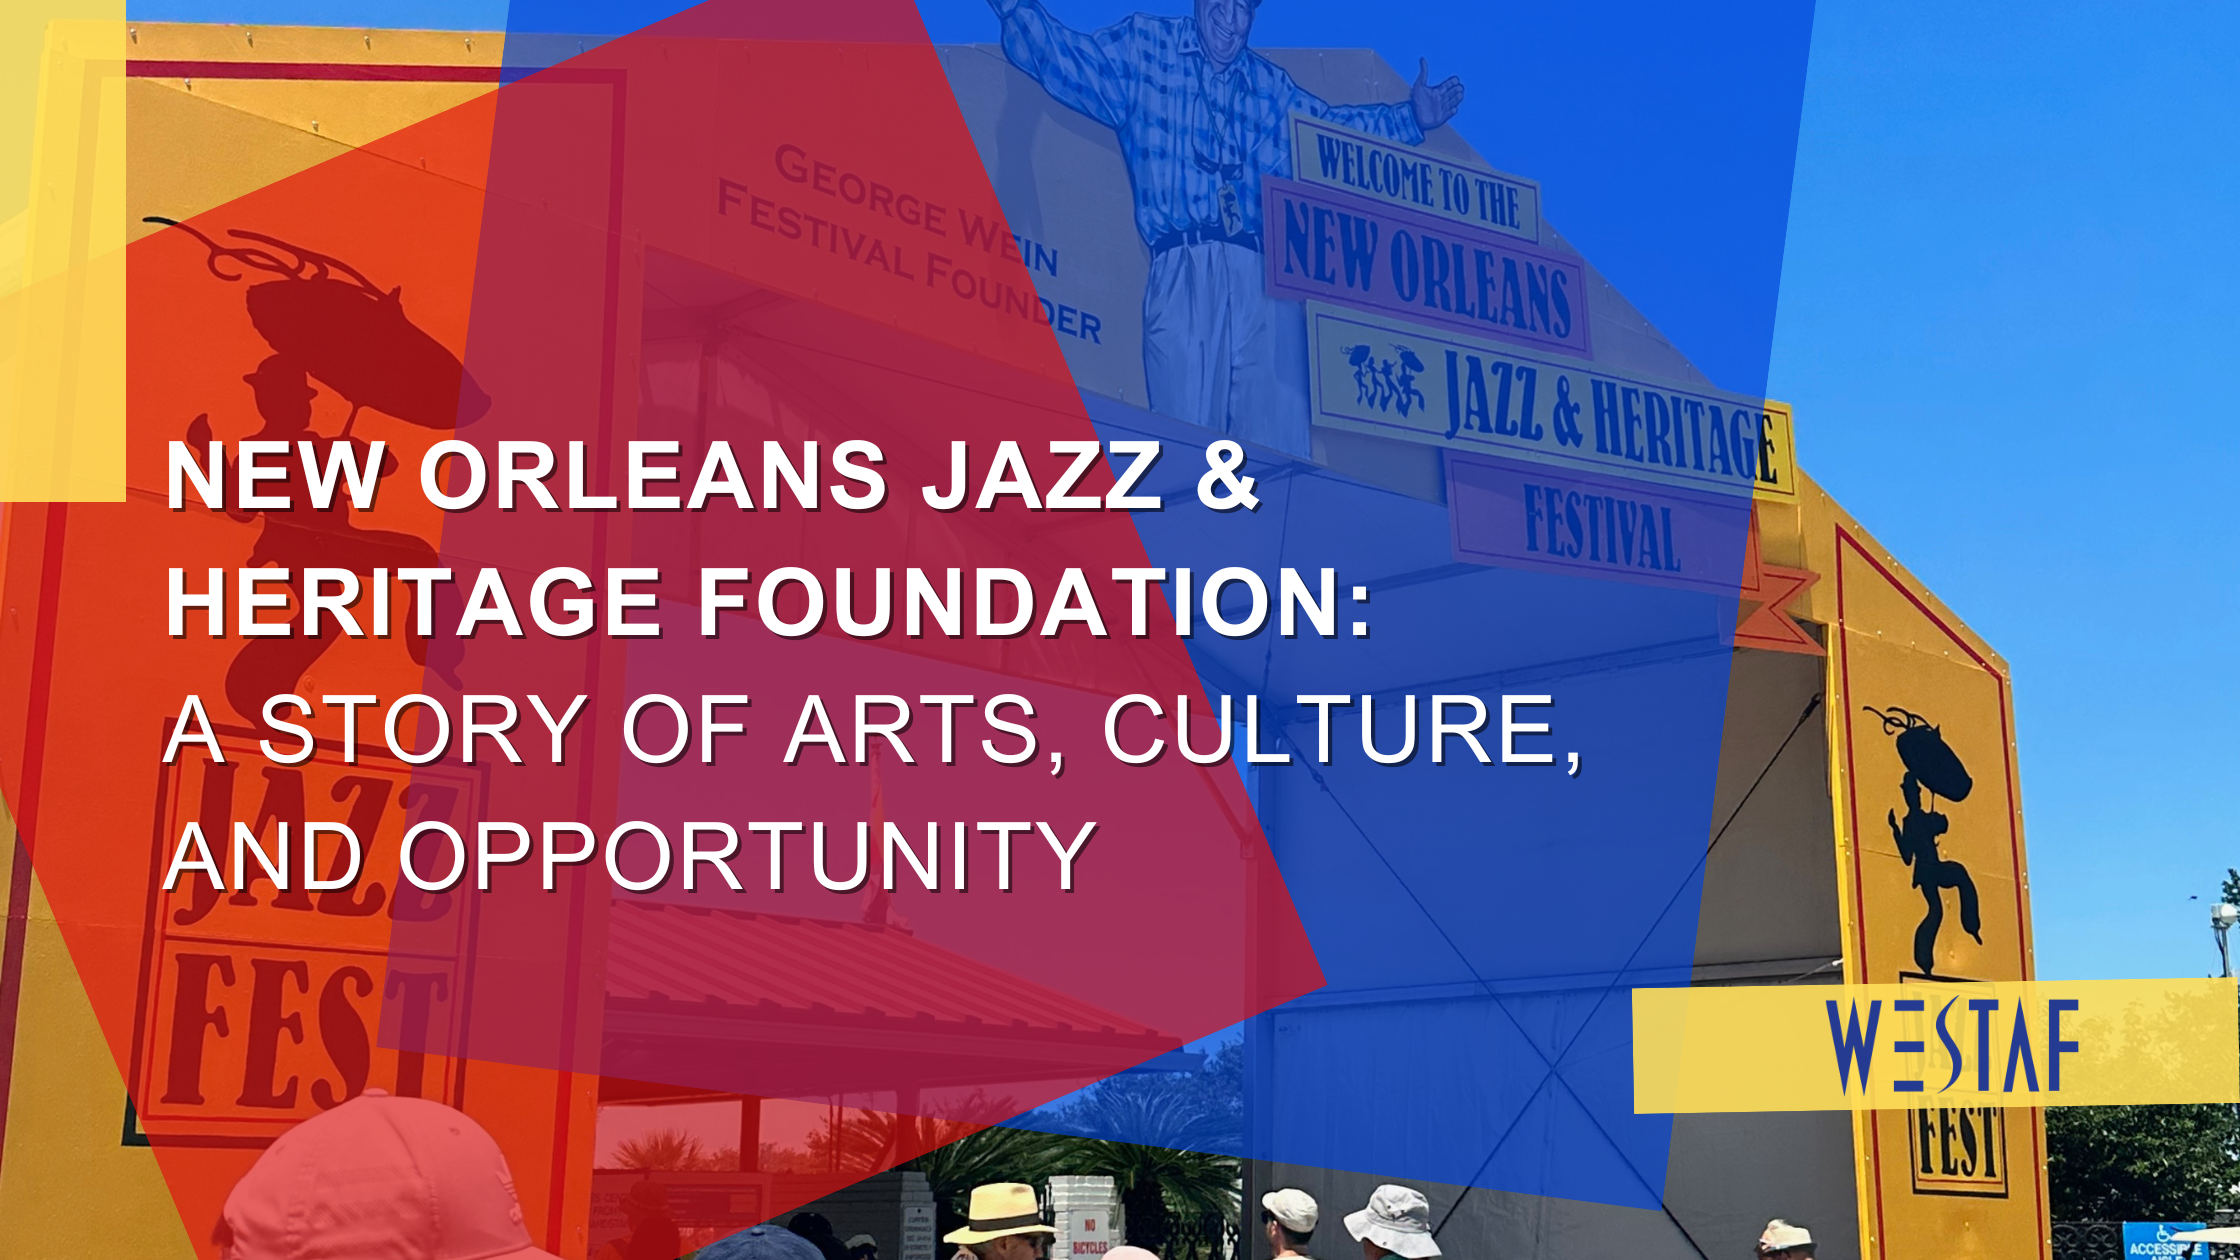 New Orleans Jazz & Heritage Foundation: A Story of Arts, Culture, and Opportunity placed on a red and blue square with a picture of the Jazz Fest in the background.